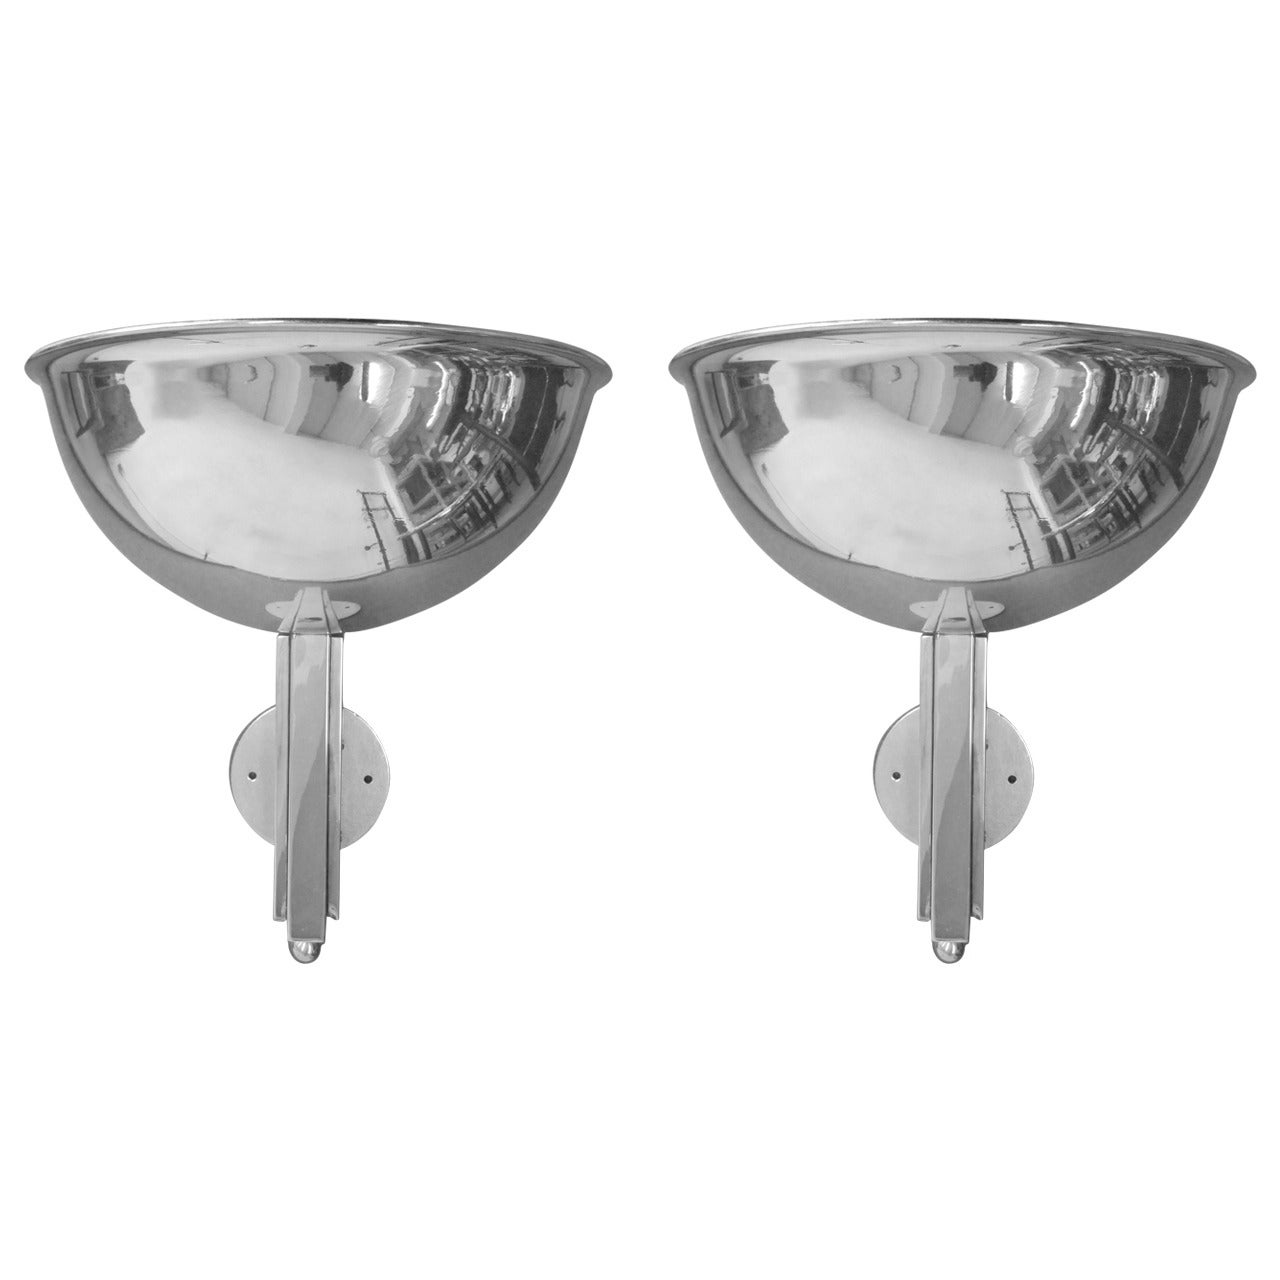 Pair of French Mid-Century Modern Nickel Wall Sconces, 1930 For Sale